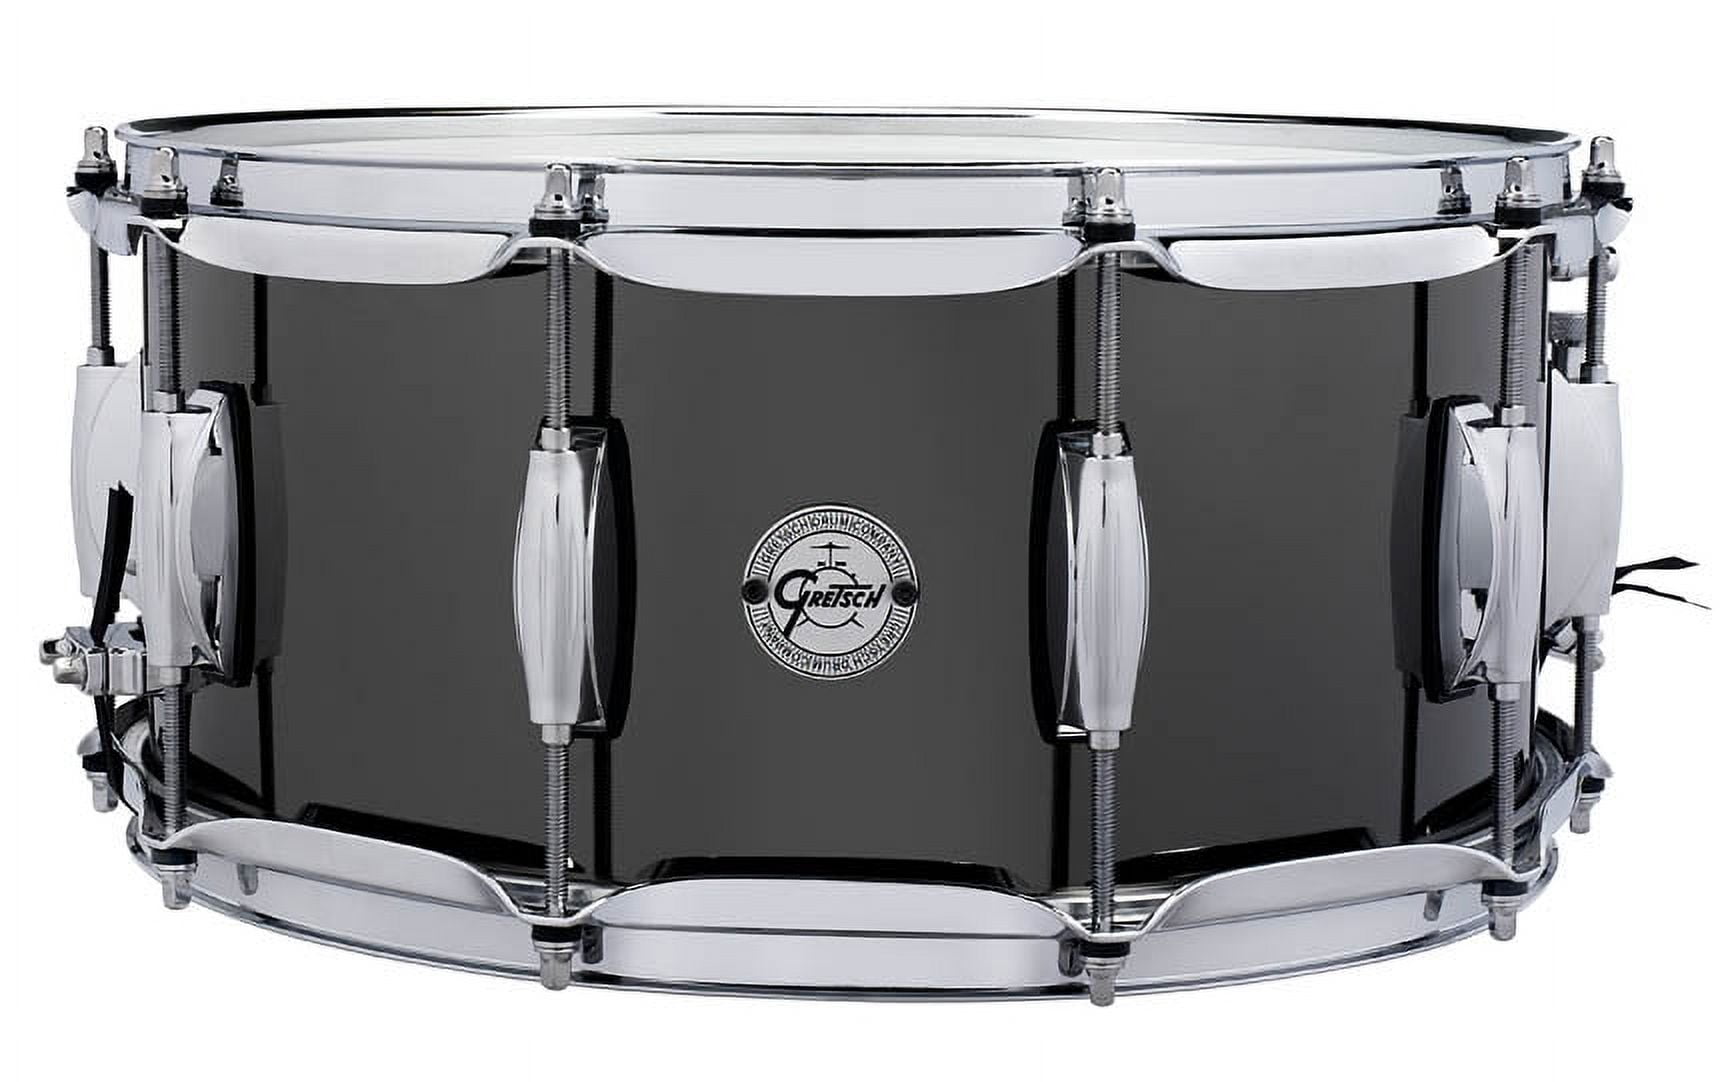 GRETSCH DRUMS CAISSE CLAIRE FULL RANGE 14 X 5 S1-0514-BNS